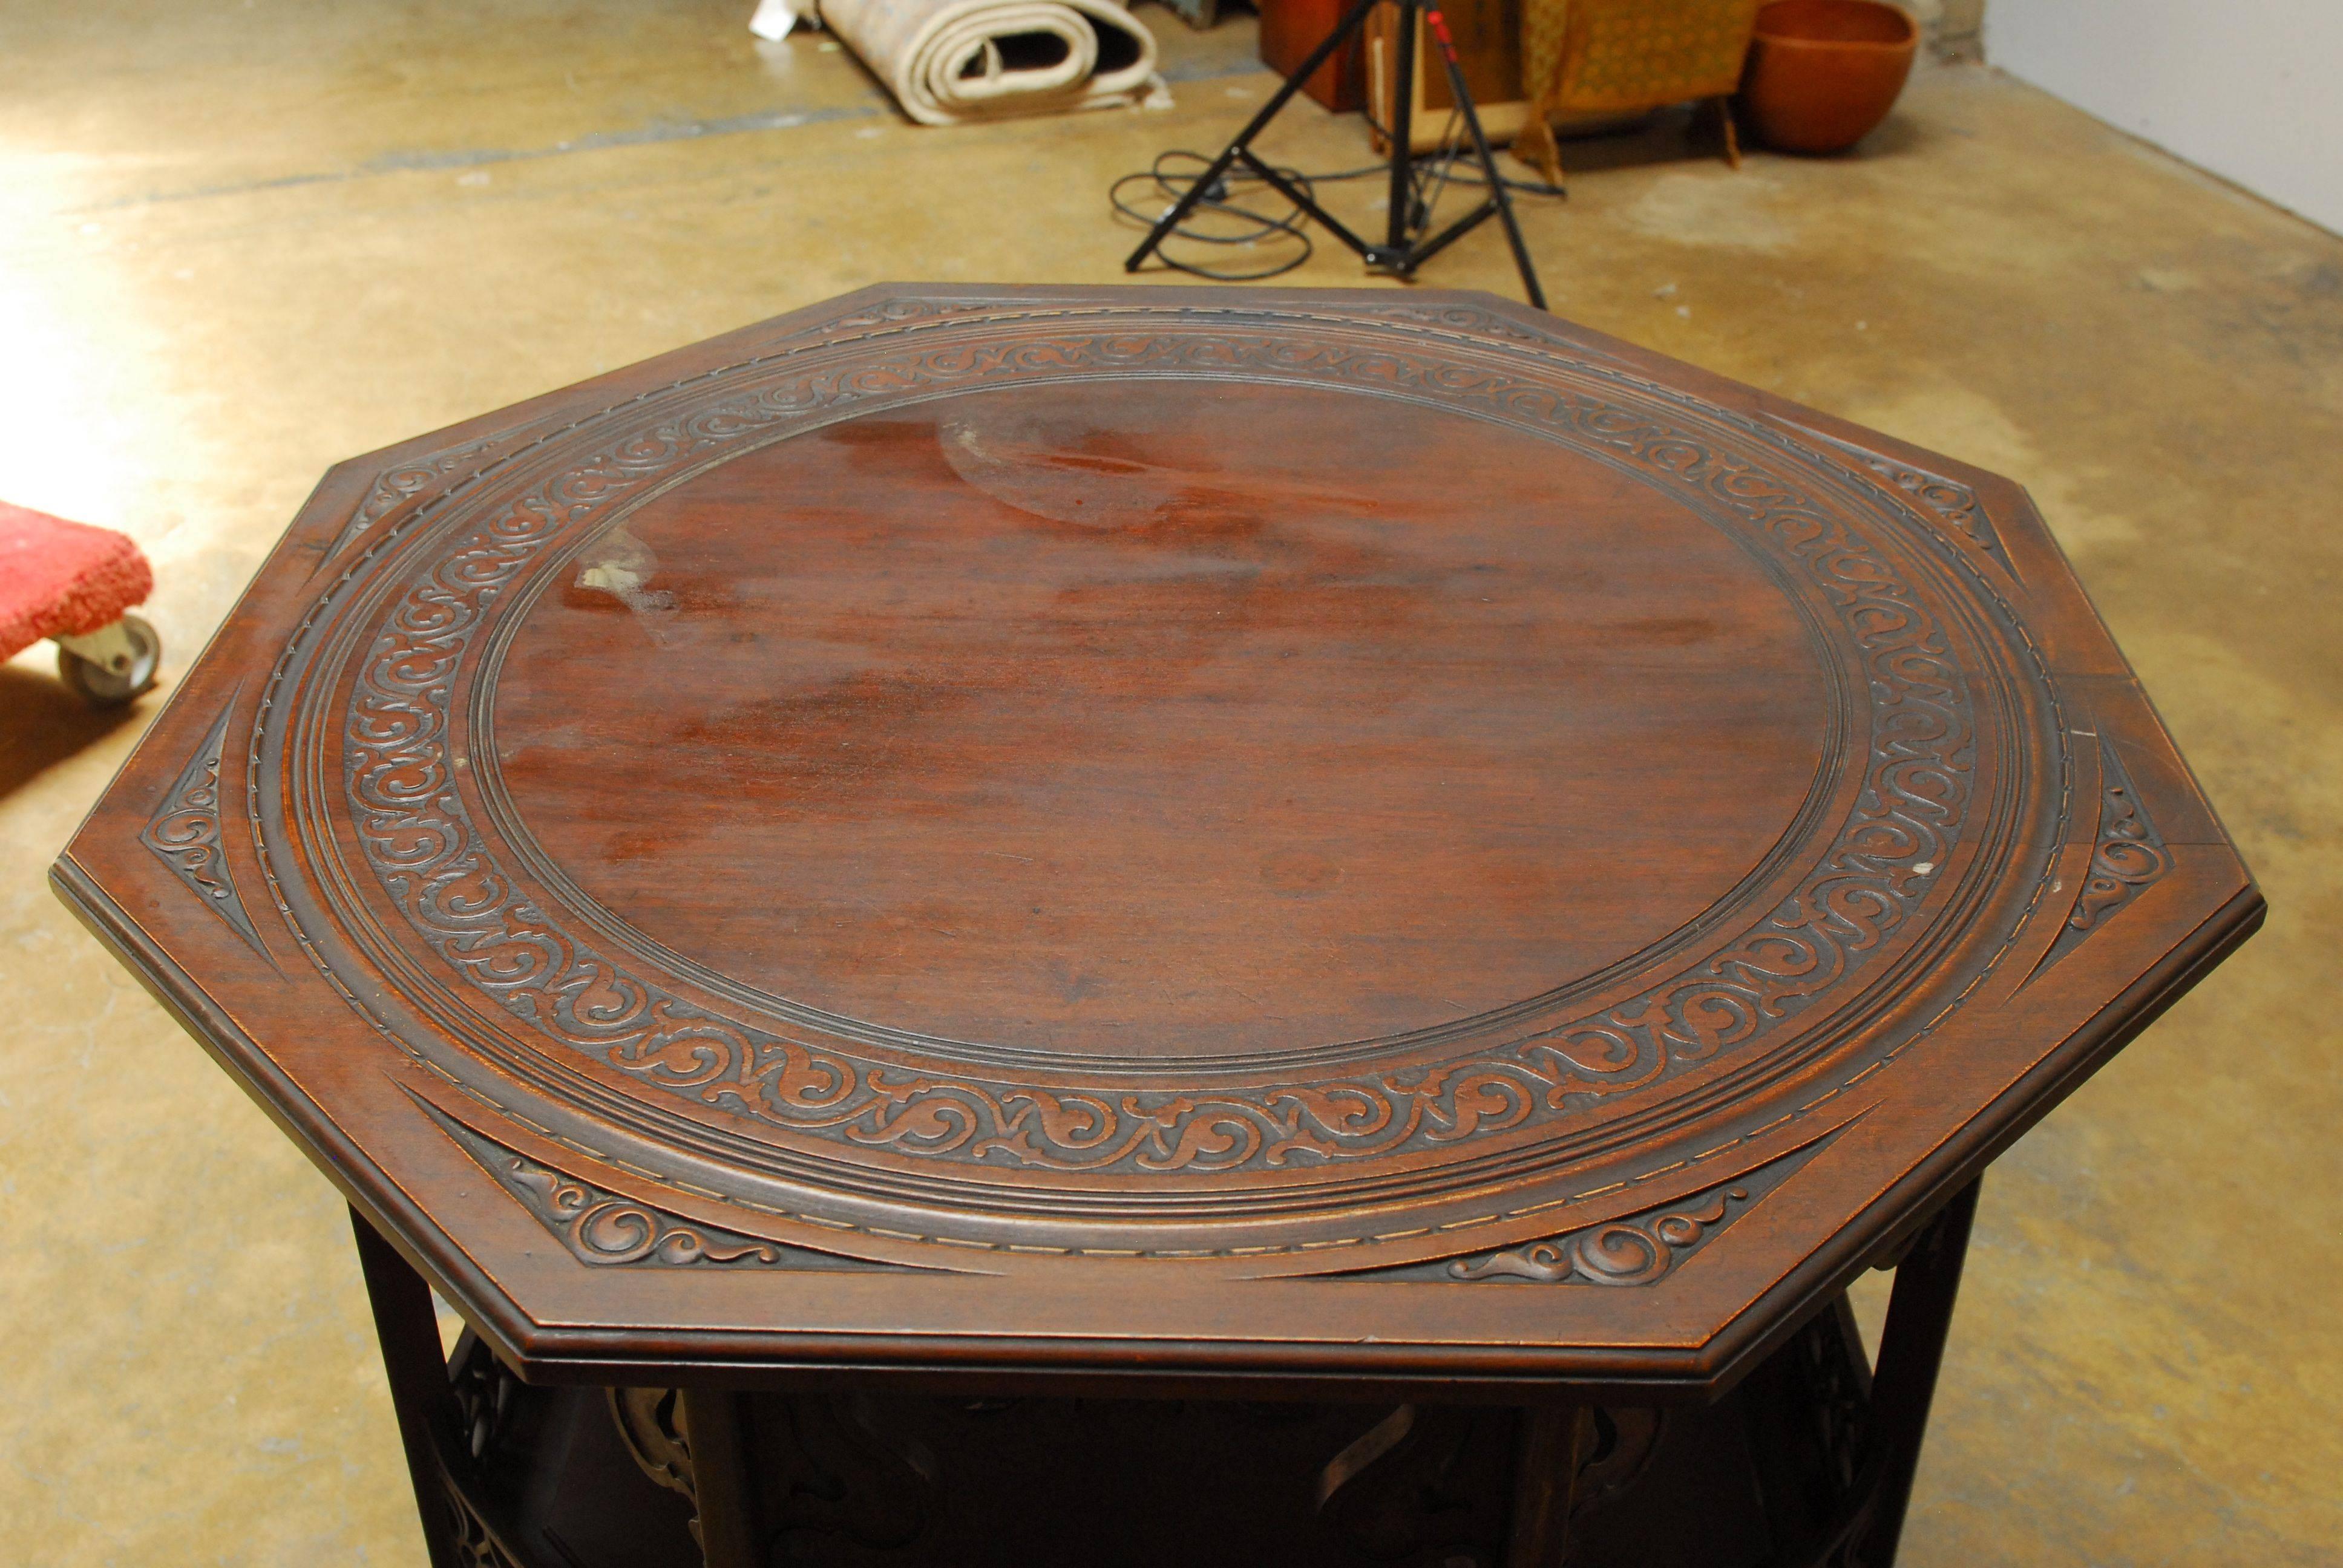 20th Century Middle Eastern Octagonal Table with Relief Carved Top